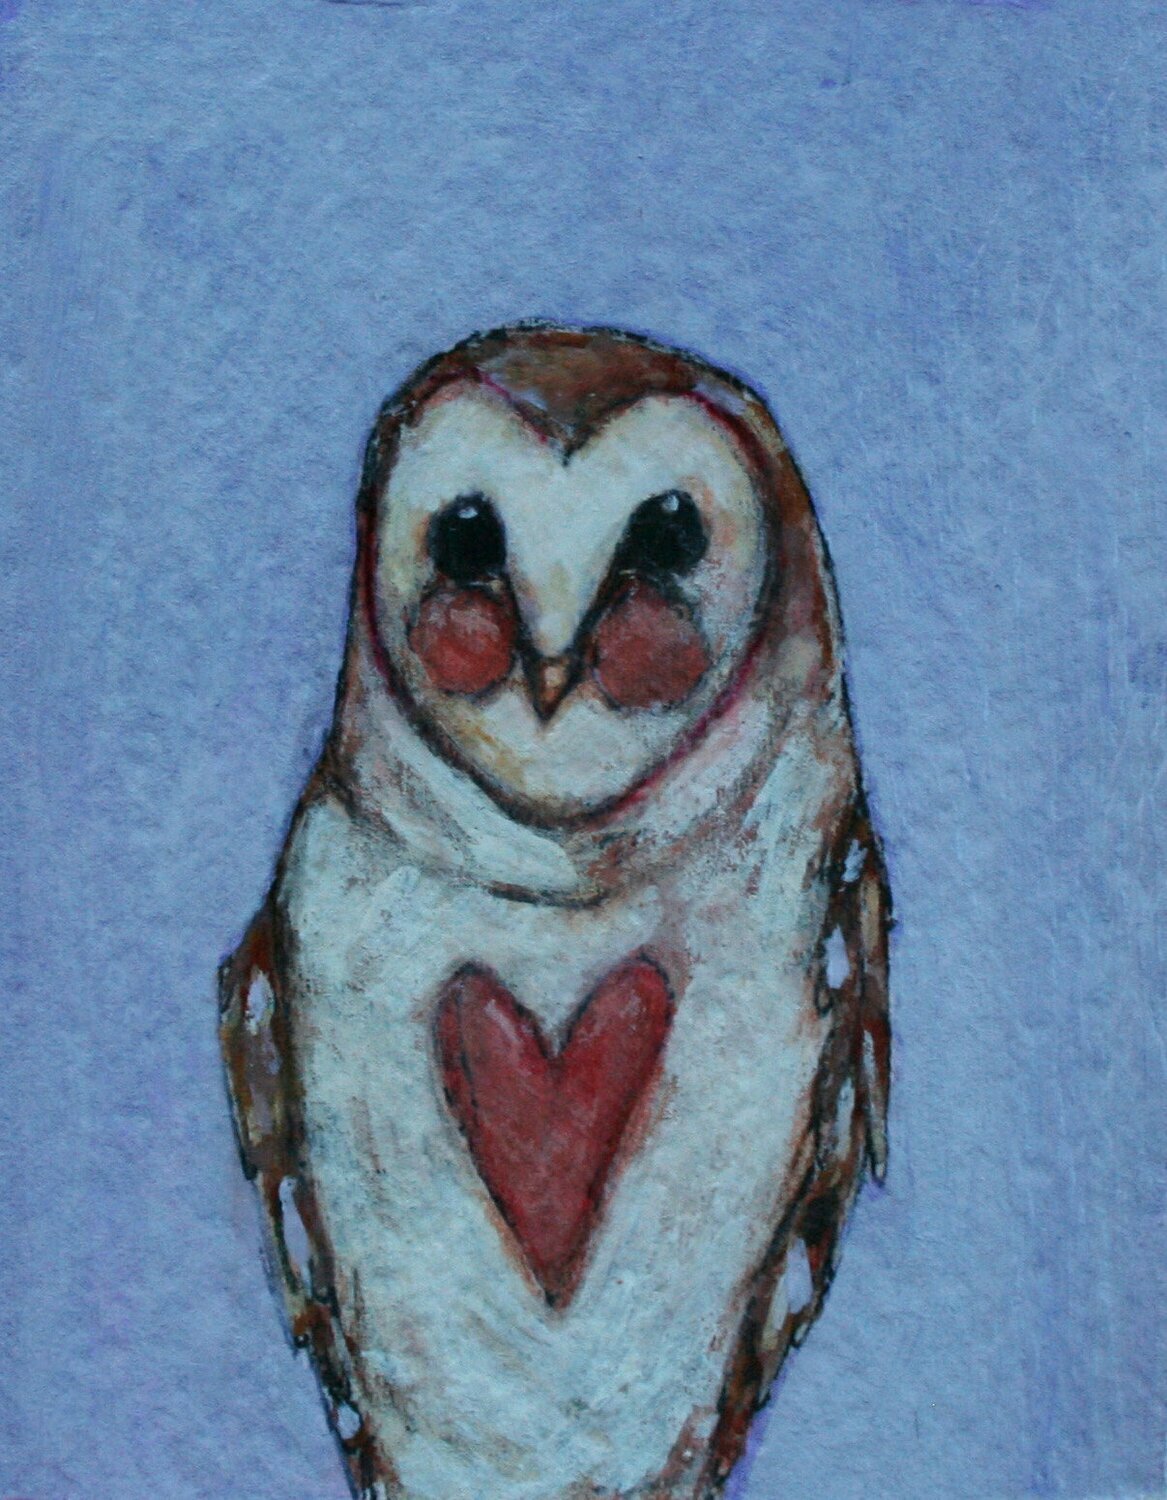 little owl artwork 2x3" a2n2koon giclee print framed in distressed white wood stand-up frame miniature cute owl with heart comes in gift box